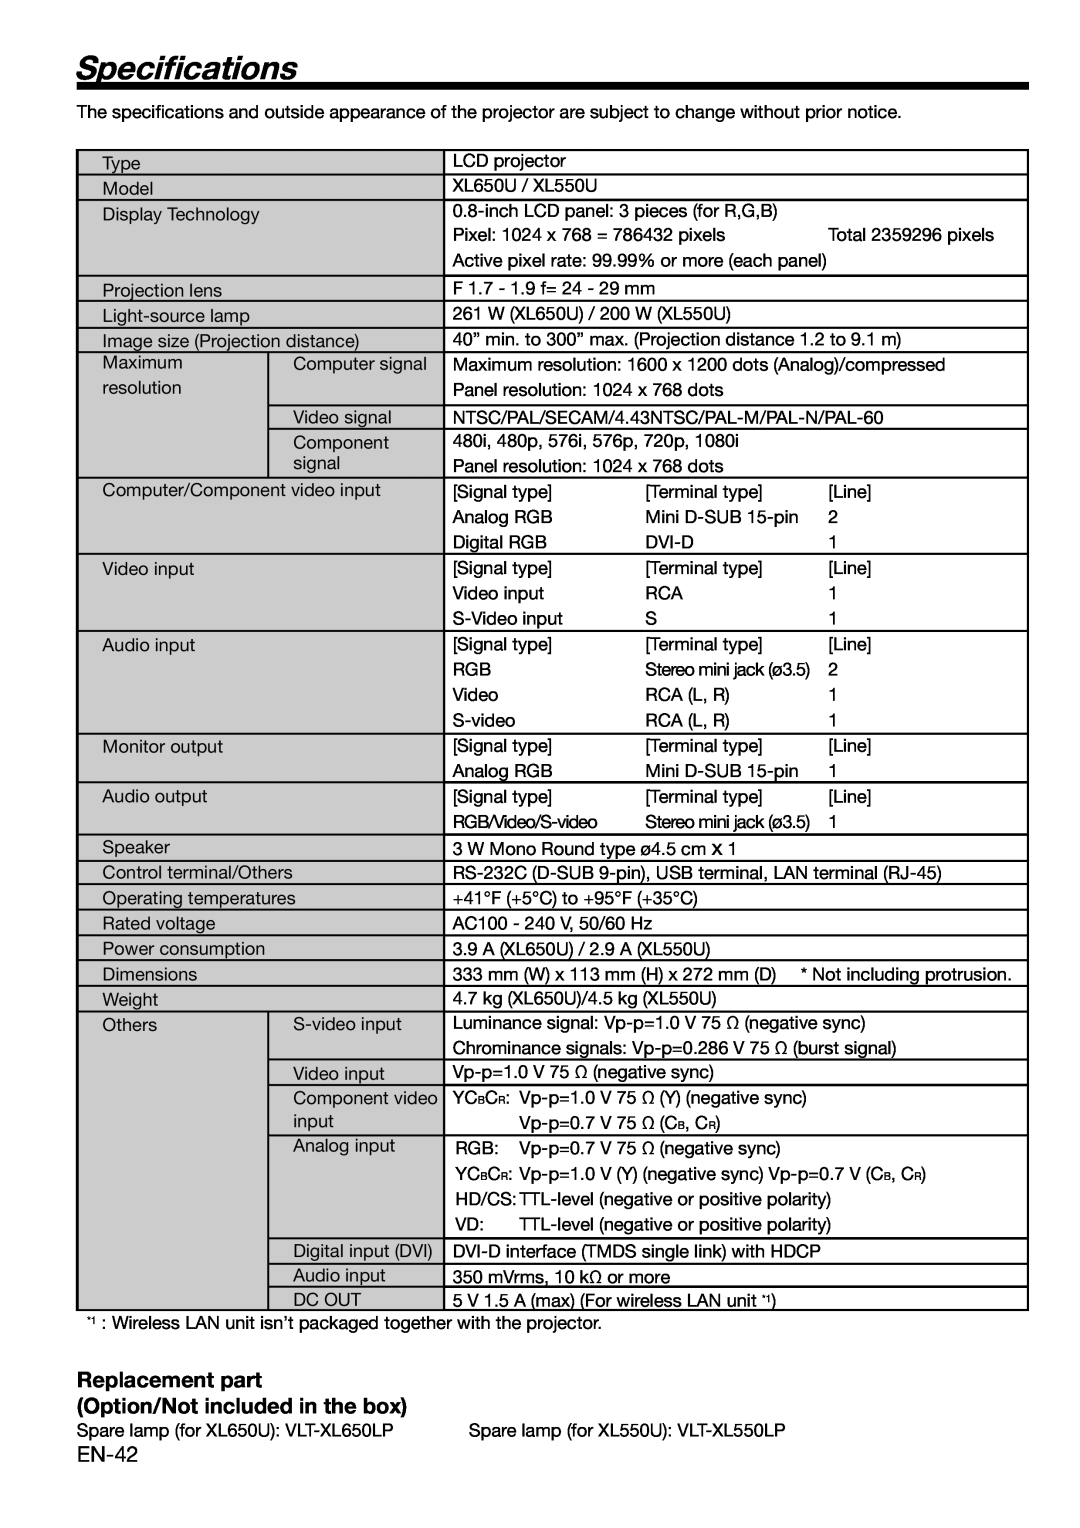 Mitsubishi Electronics XL650U user manual Speciﬁcations, Replacement part Option/Not included in the box 